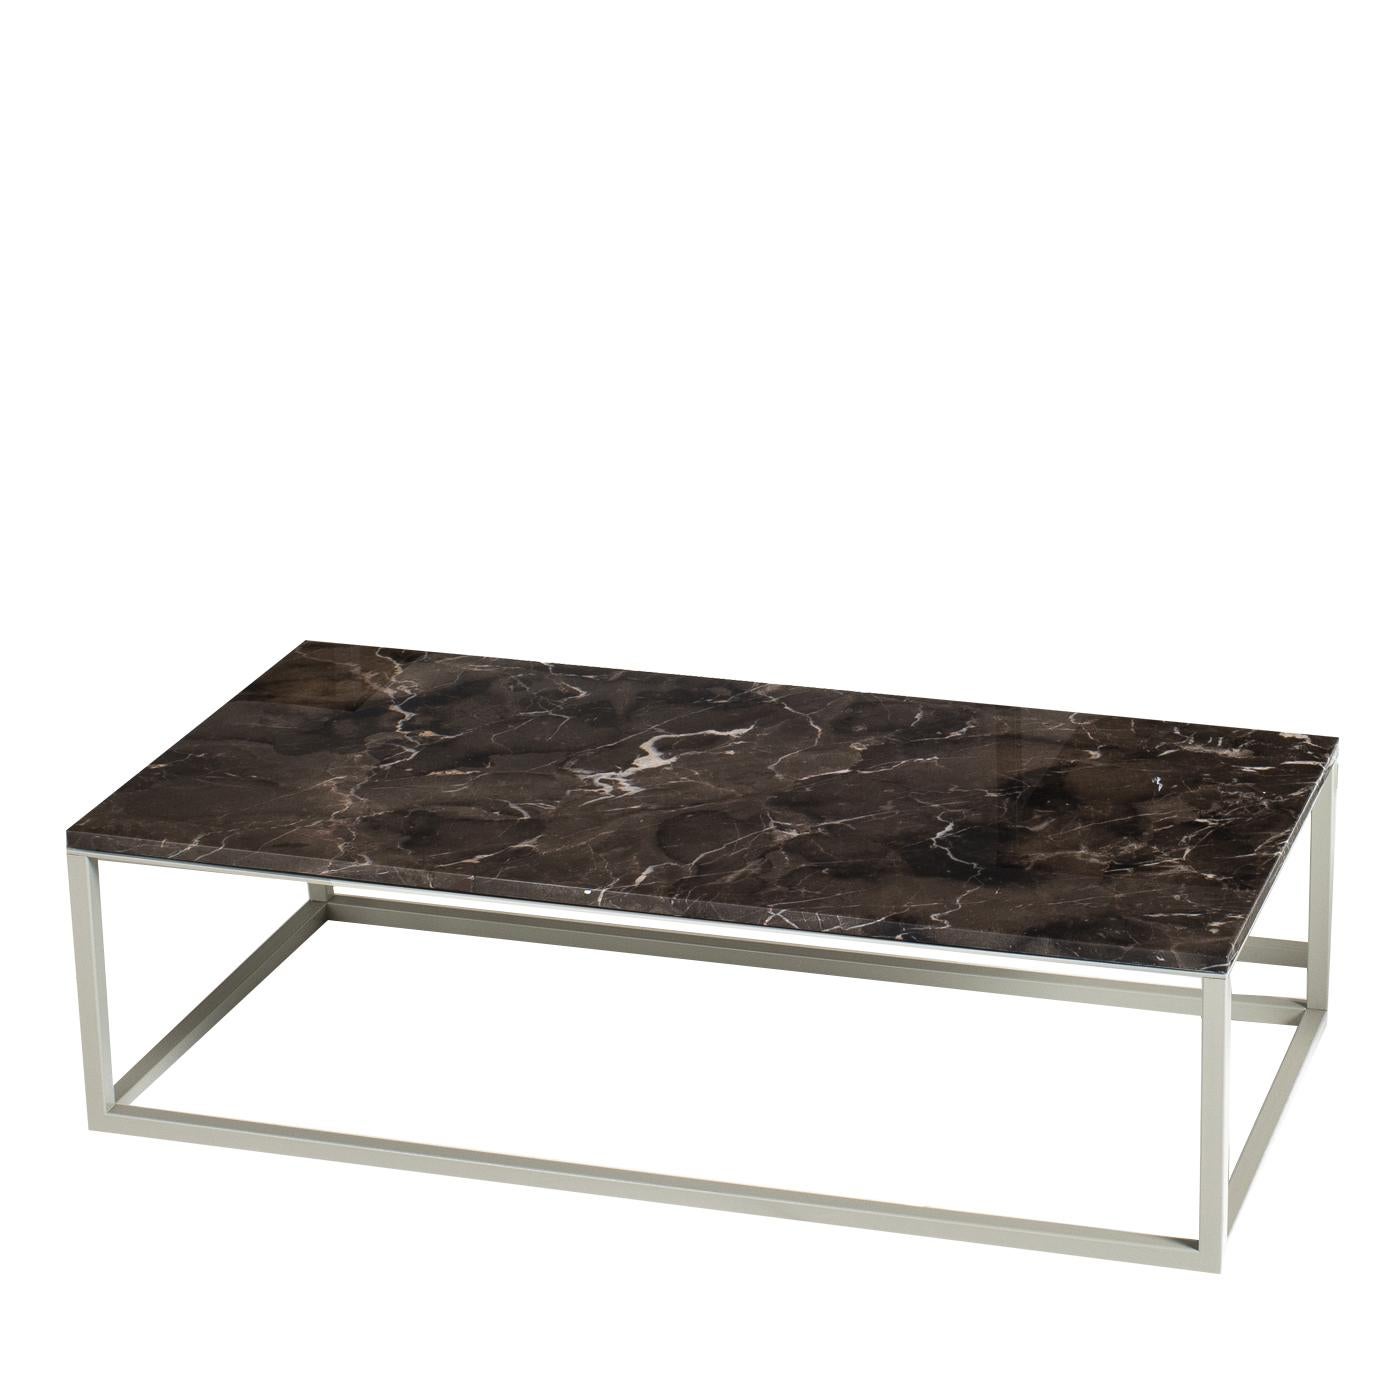 Characterized by a slim, minimalist design, the square less coffee table is an effortlessly chic piece for contemporary living rooms. Making the table extra light is the designer's decision to place the top directly on the base. Best of all, the